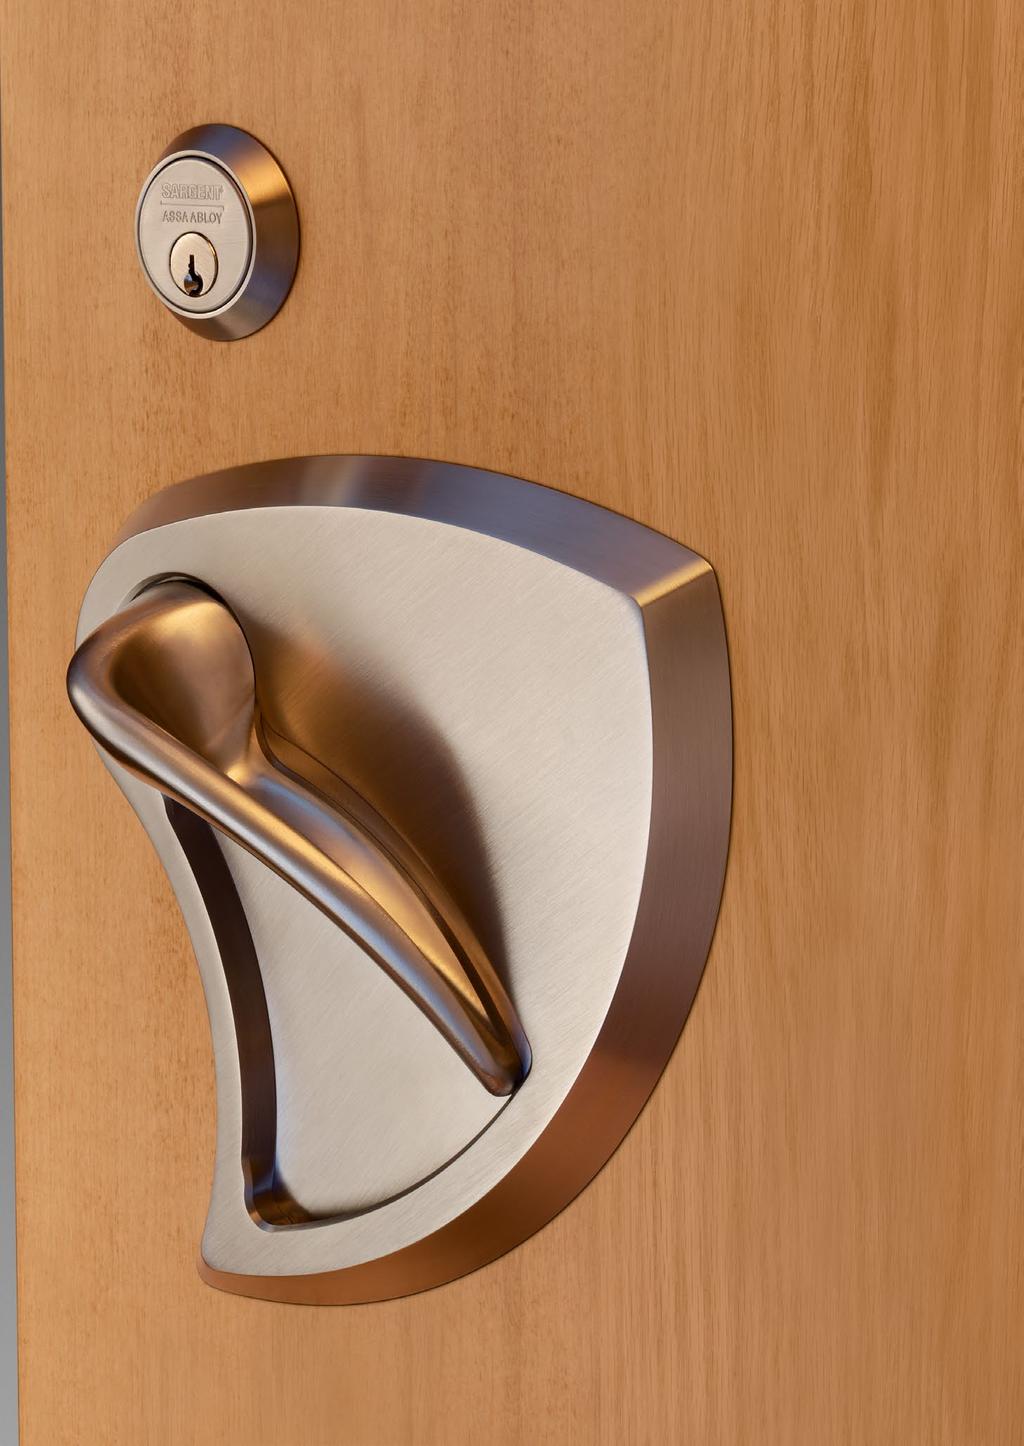 Door Hardware Integrated Low Profile Trim This innovative, low profile trim integrates the lever and escutcheon, creating a superior design that is safer, easy to use and aesthetically pleasing.